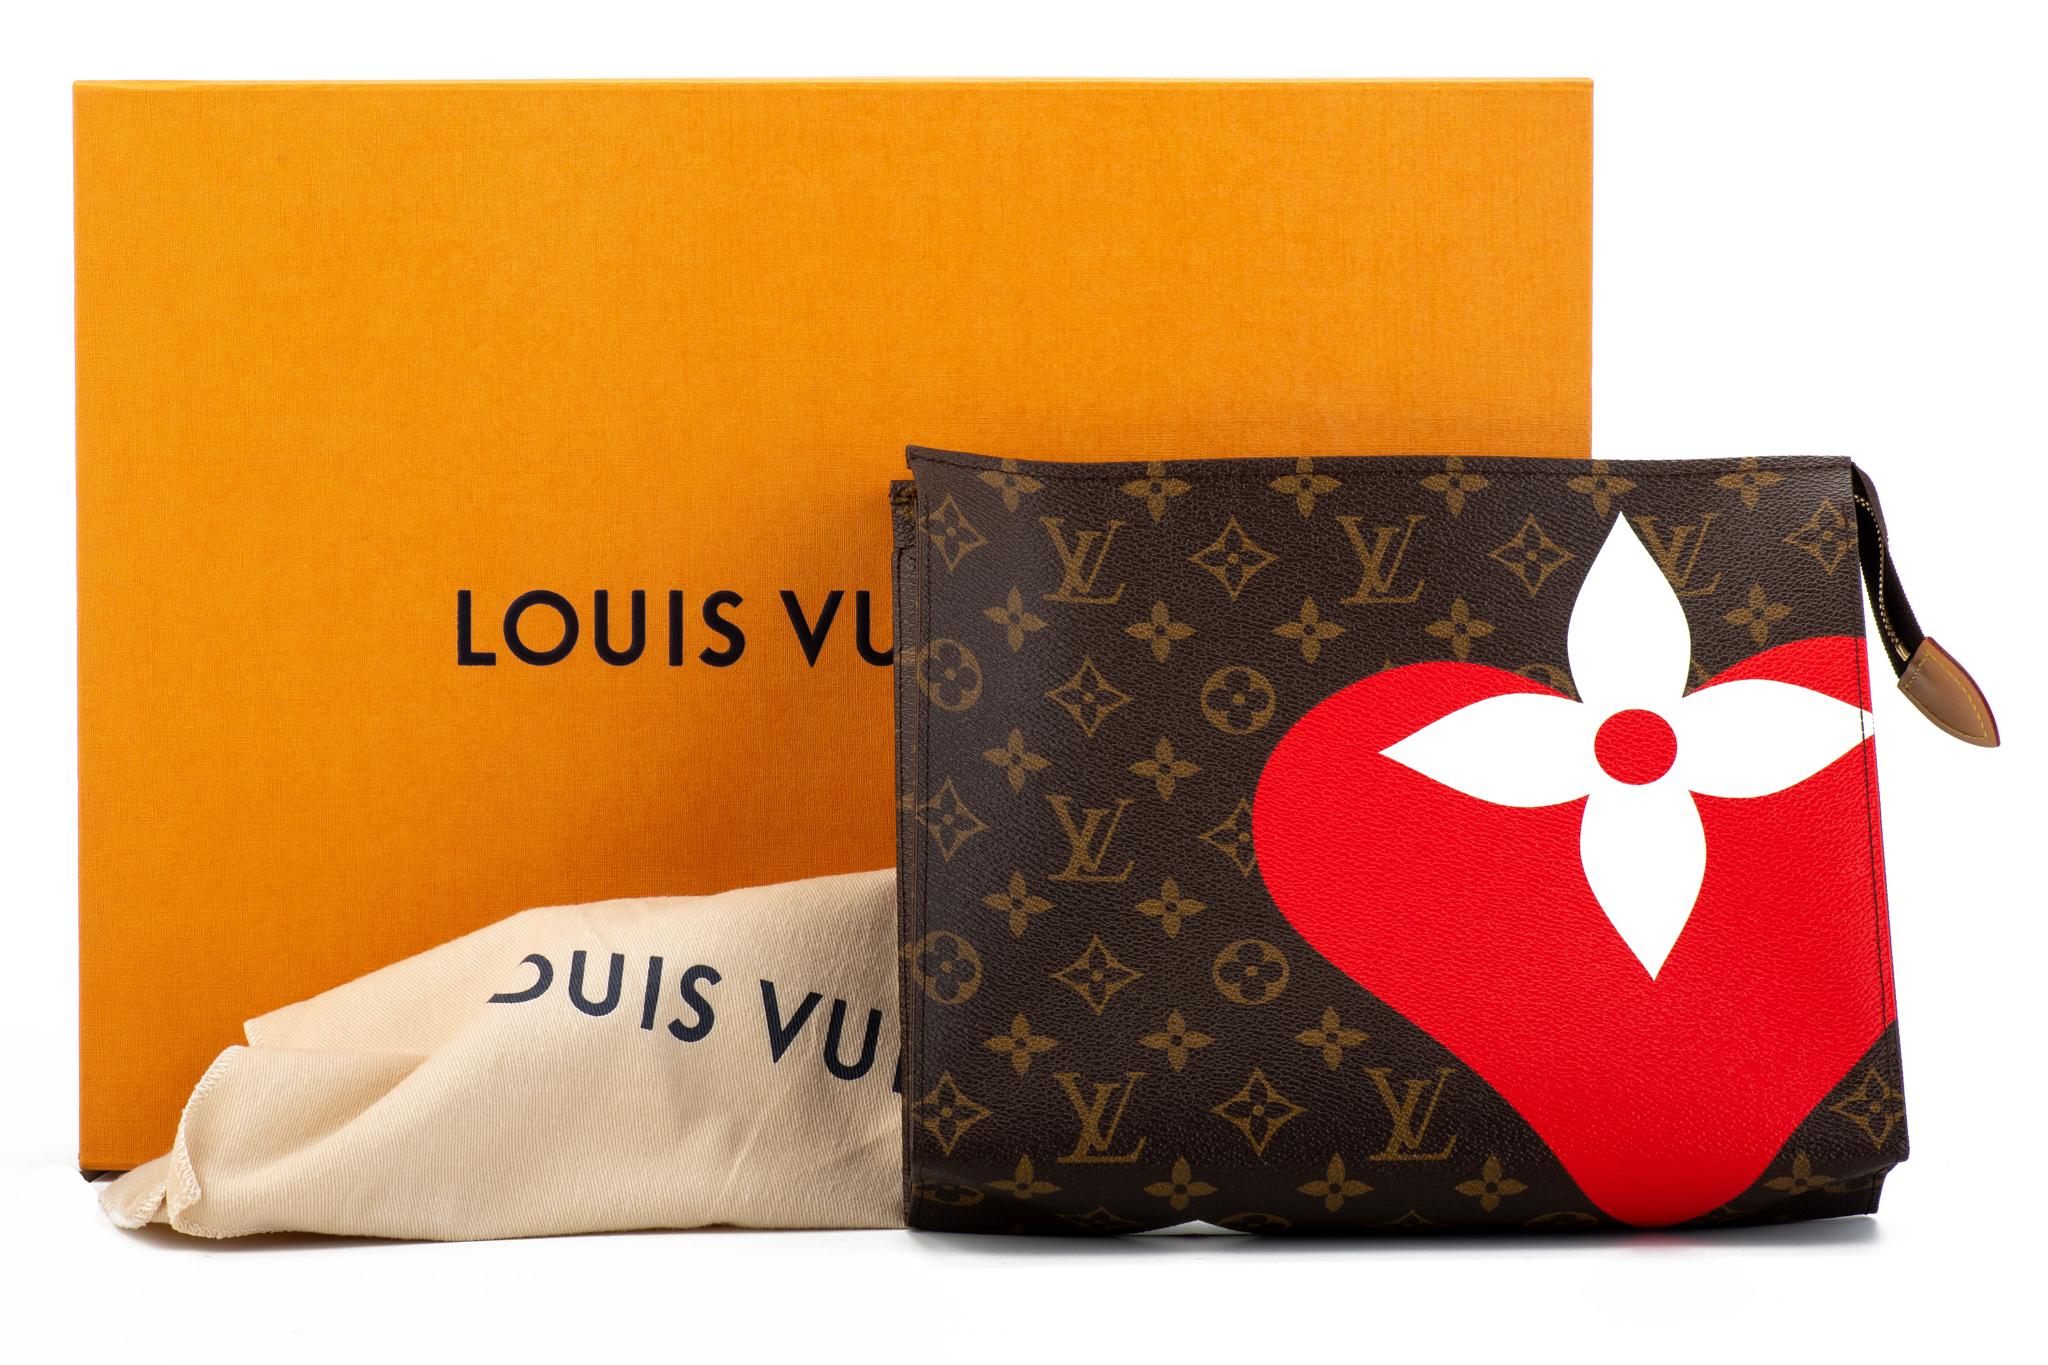 Louis Vuitton Cruise 2021 limited edition heart monogram clutch. Brand new with original dust cover and box.